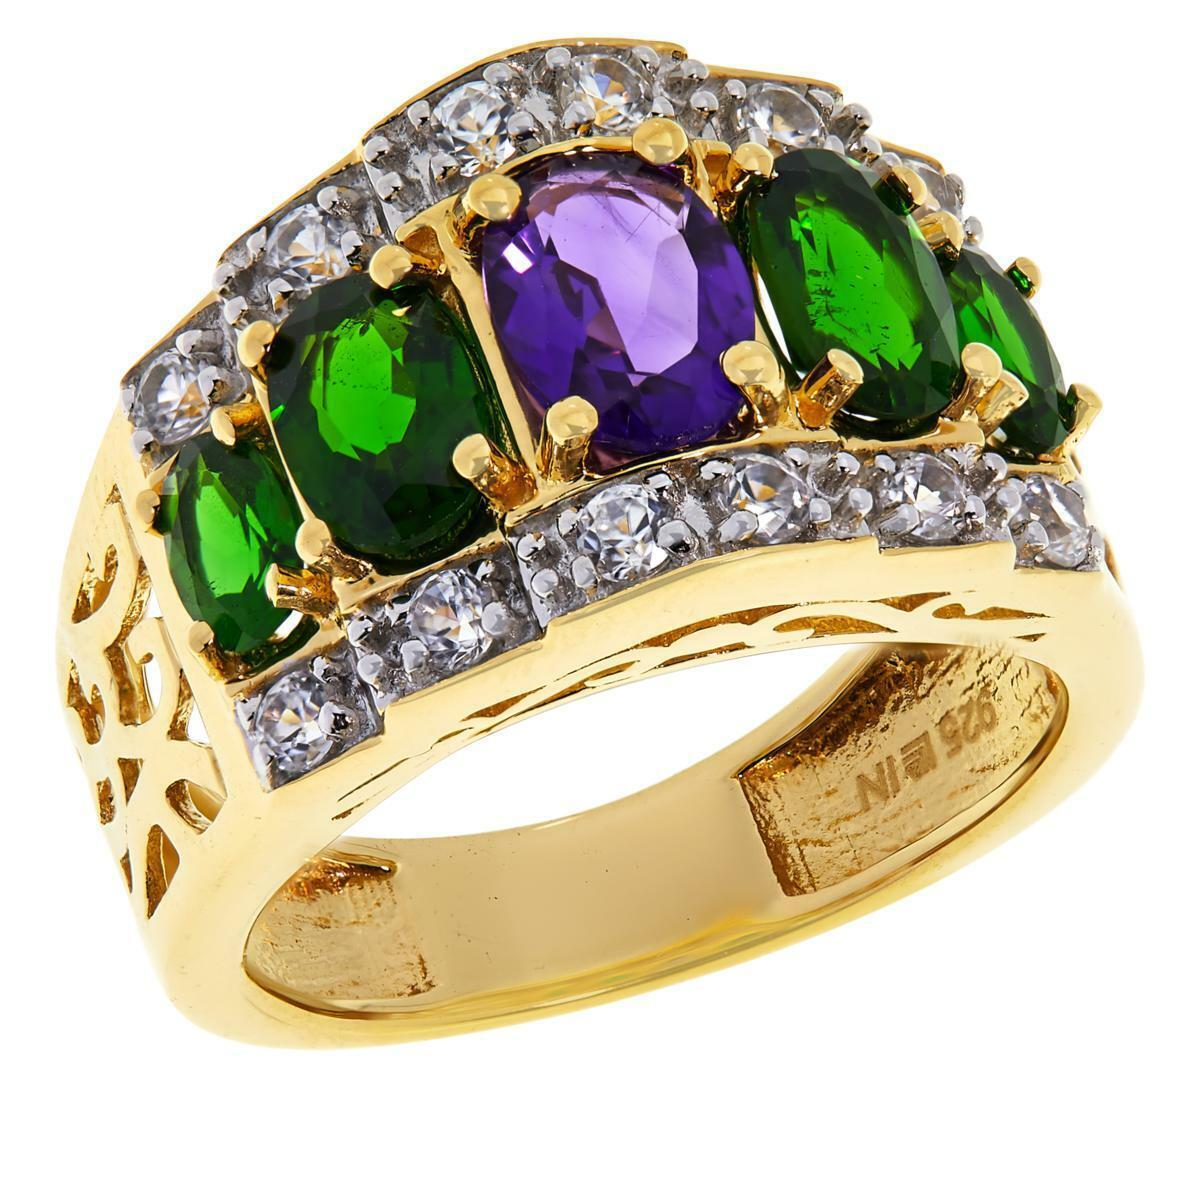 Colleen Lopez Gold-Plated Amethyst, Chrome Diopside and Zircon Ring, Size 6